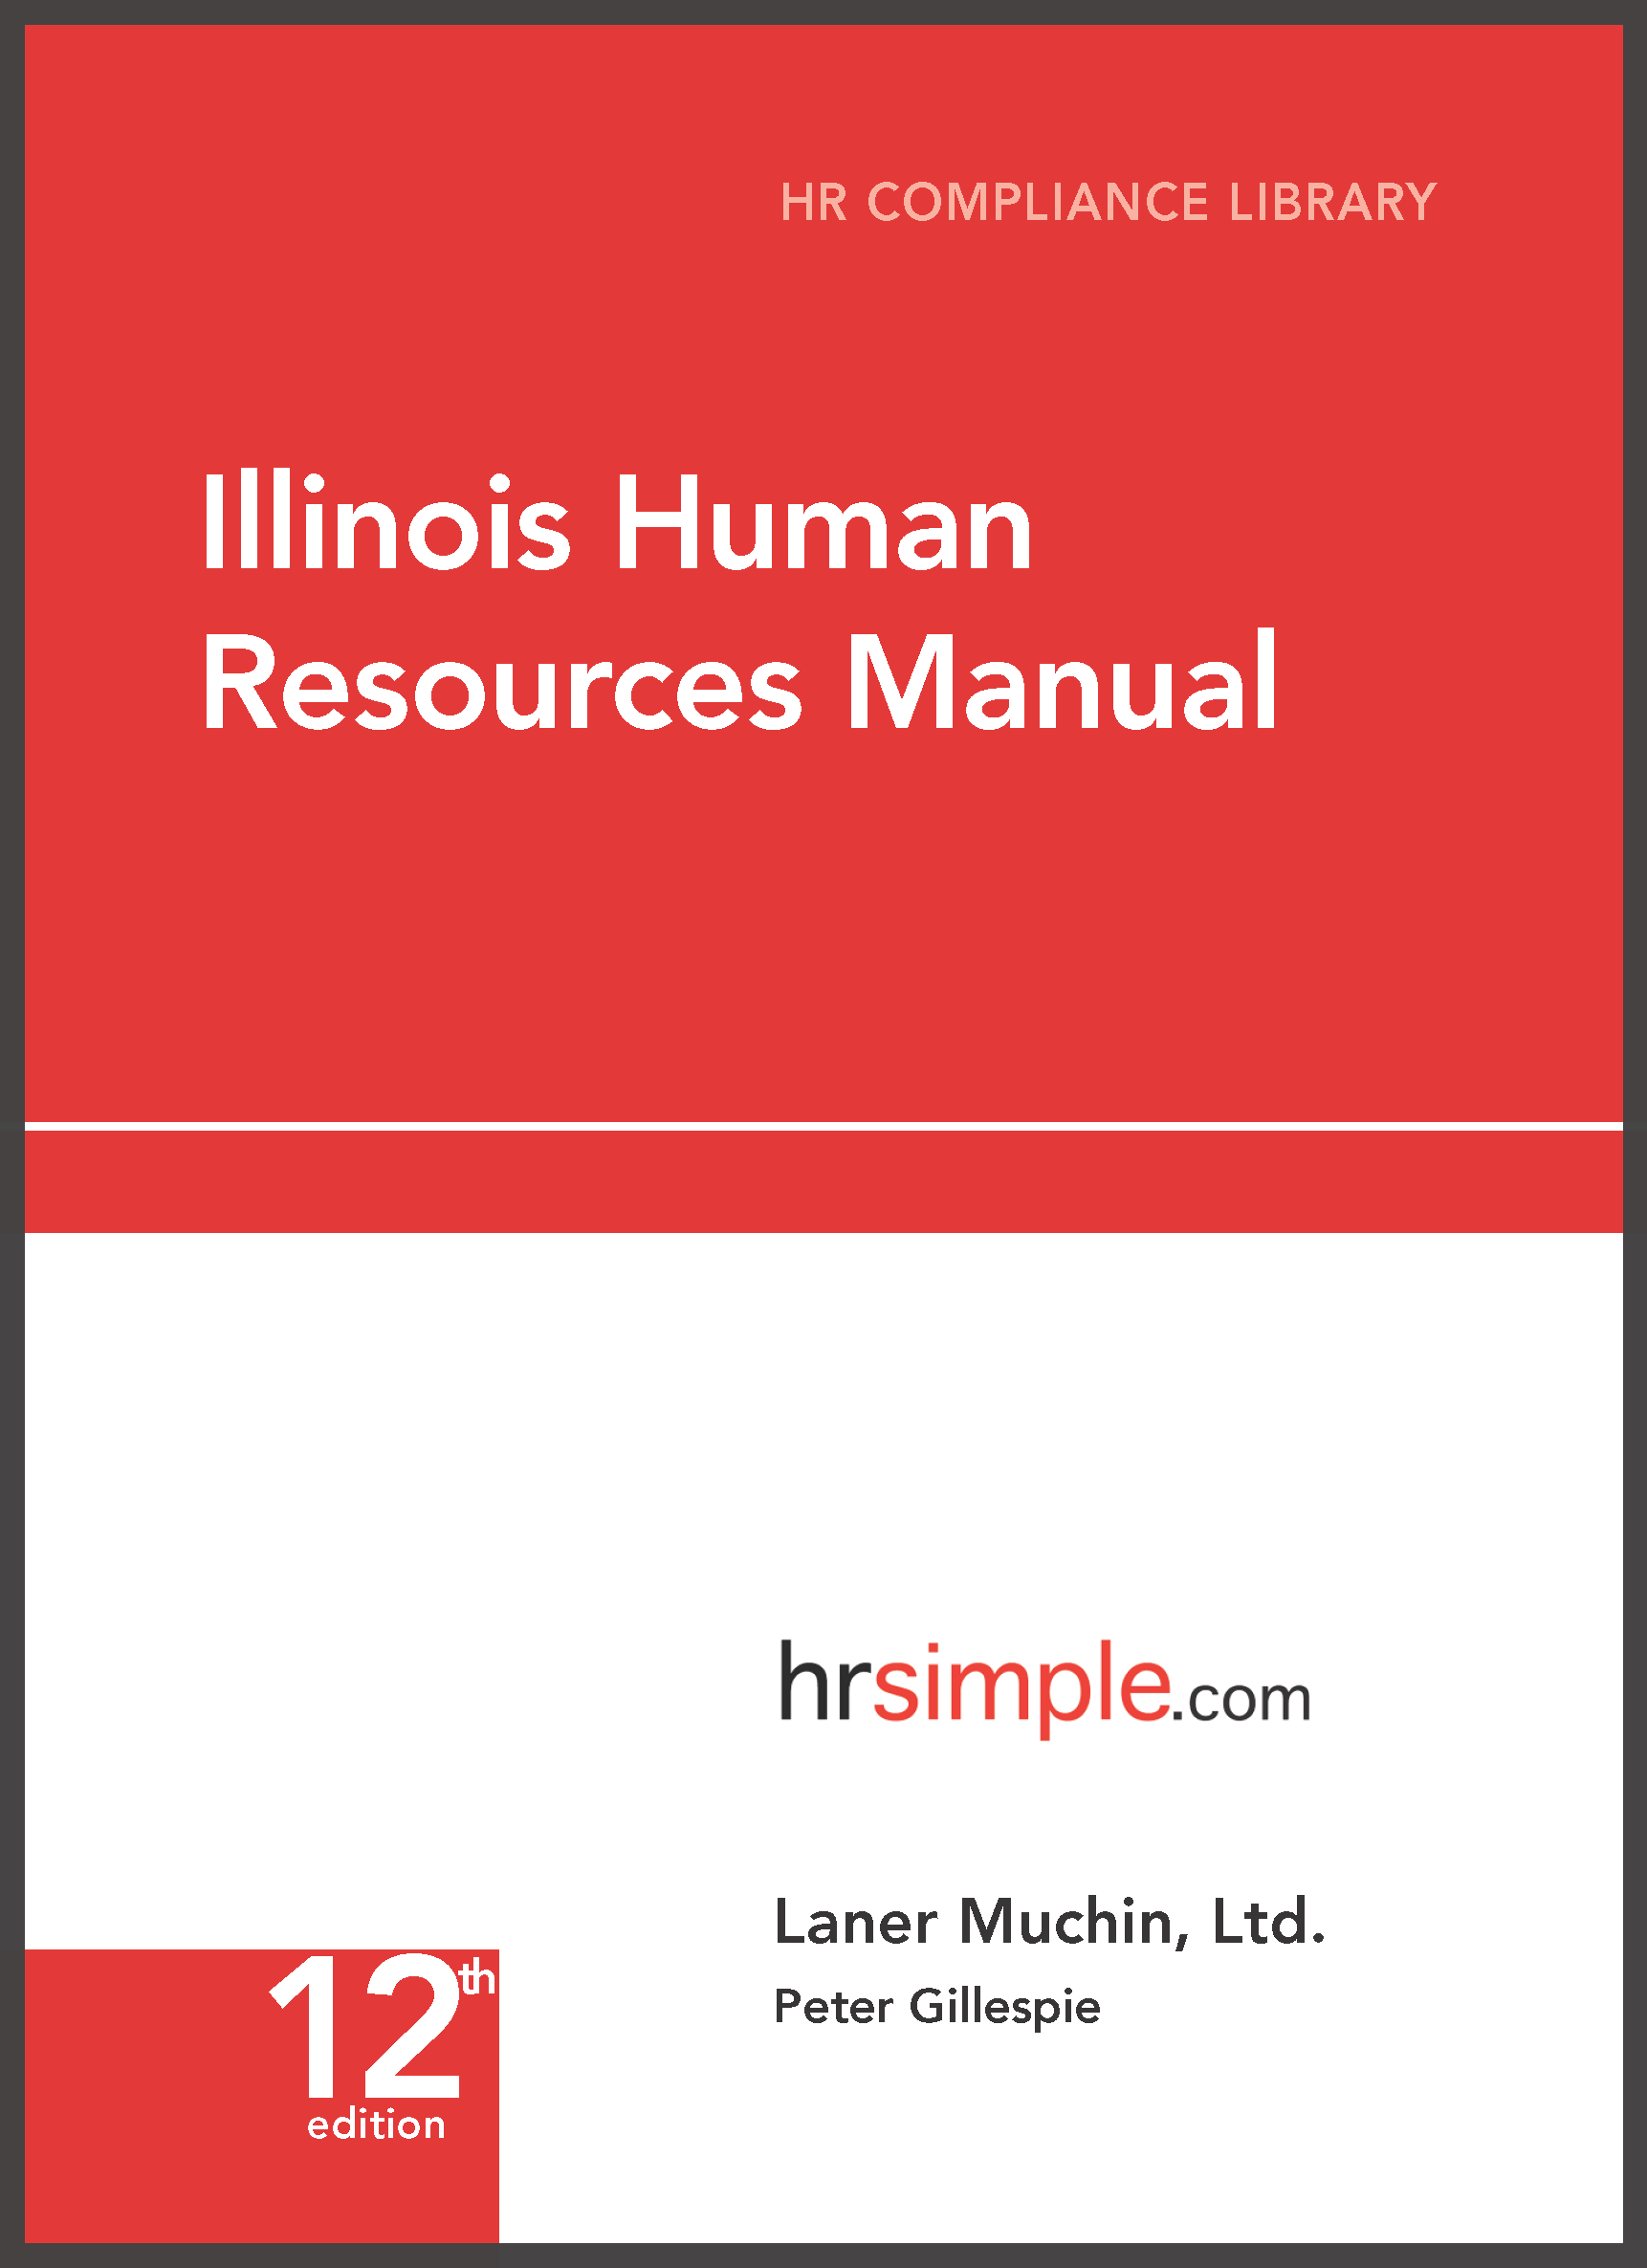 Illinois Human Resources Library employment law image, remote work, labor laws, employment laws, right to work, order of protection, minimum wage